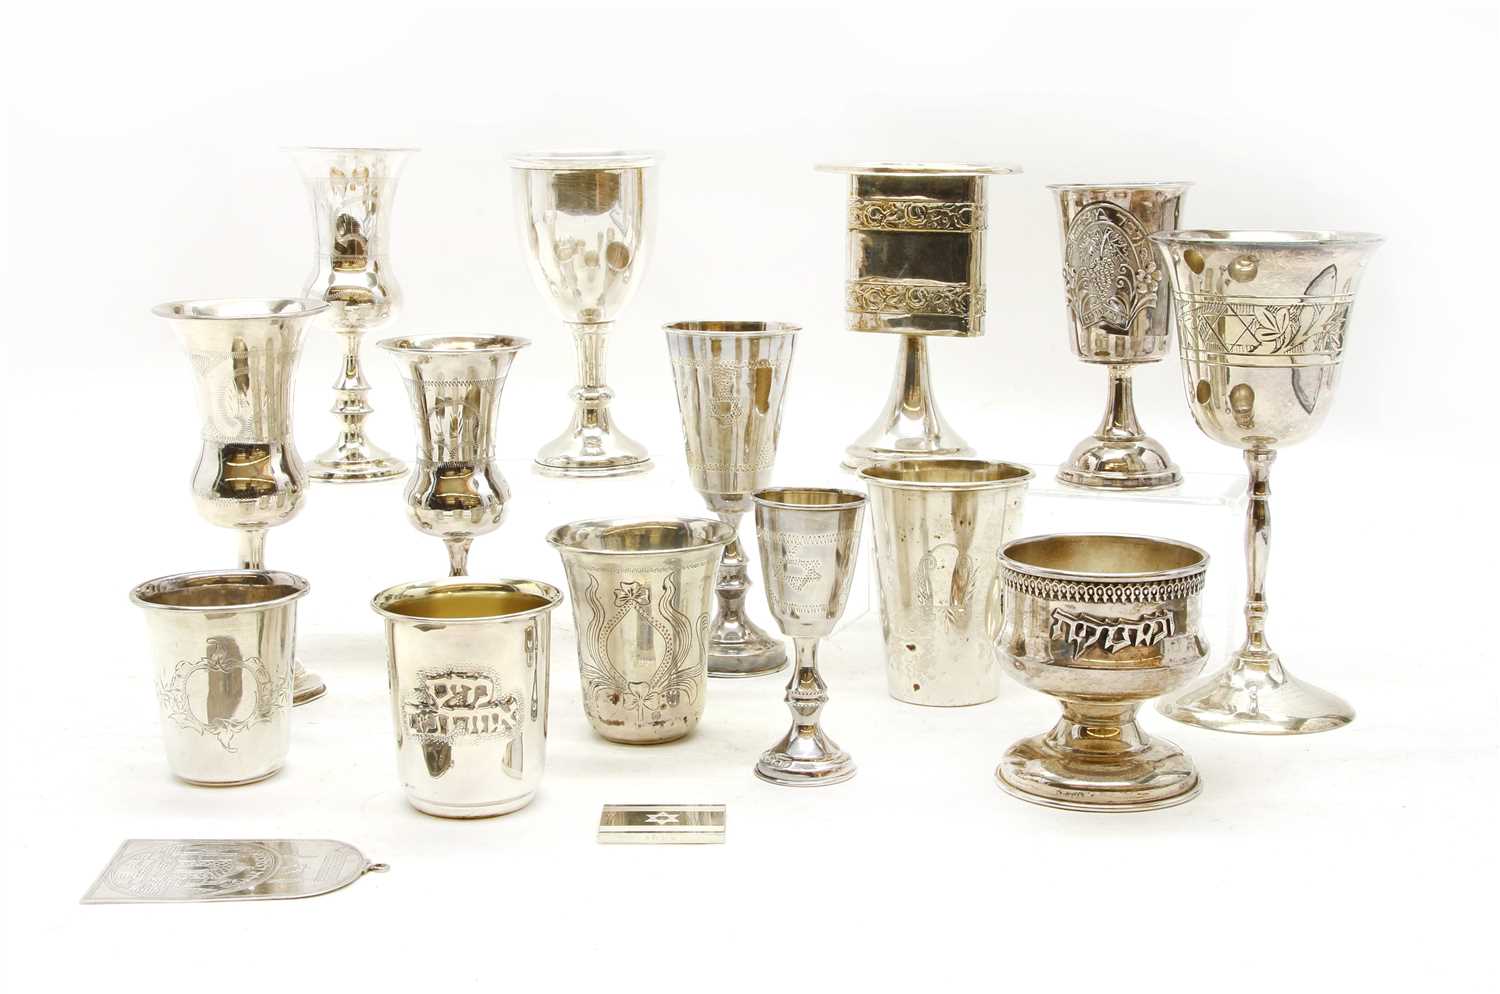 Lot 116 - A collection of silver and silver plated Judaica items